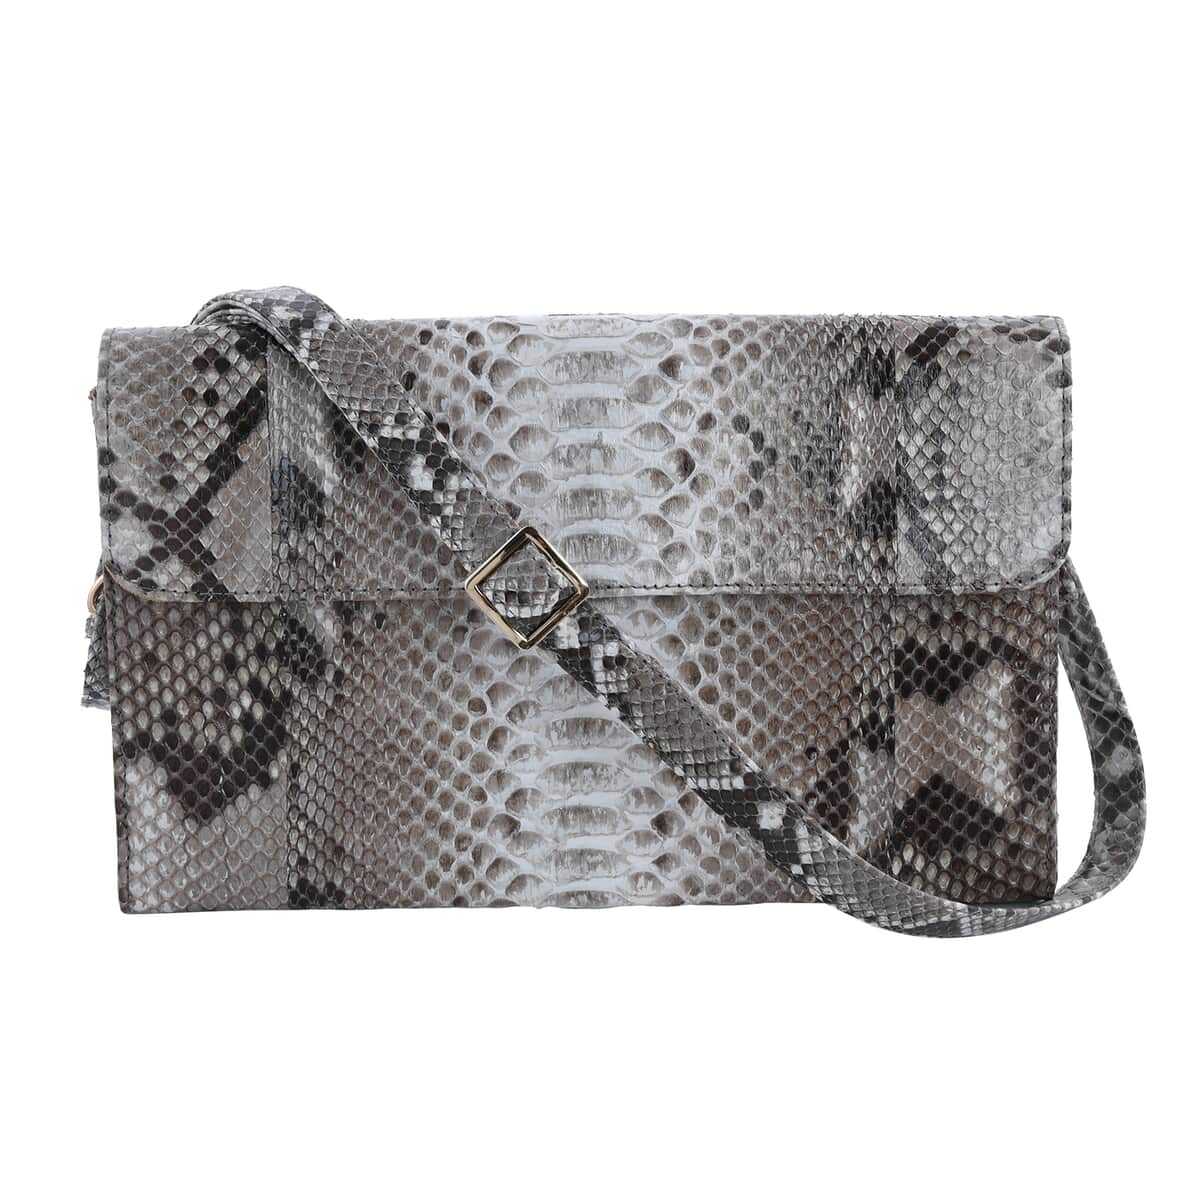 The Pelle Collection Natural Python Leather Evening Clutch Bag with Detachable Strap, Clutches for Women, Leather Handbag, Clutch Purse image number 0